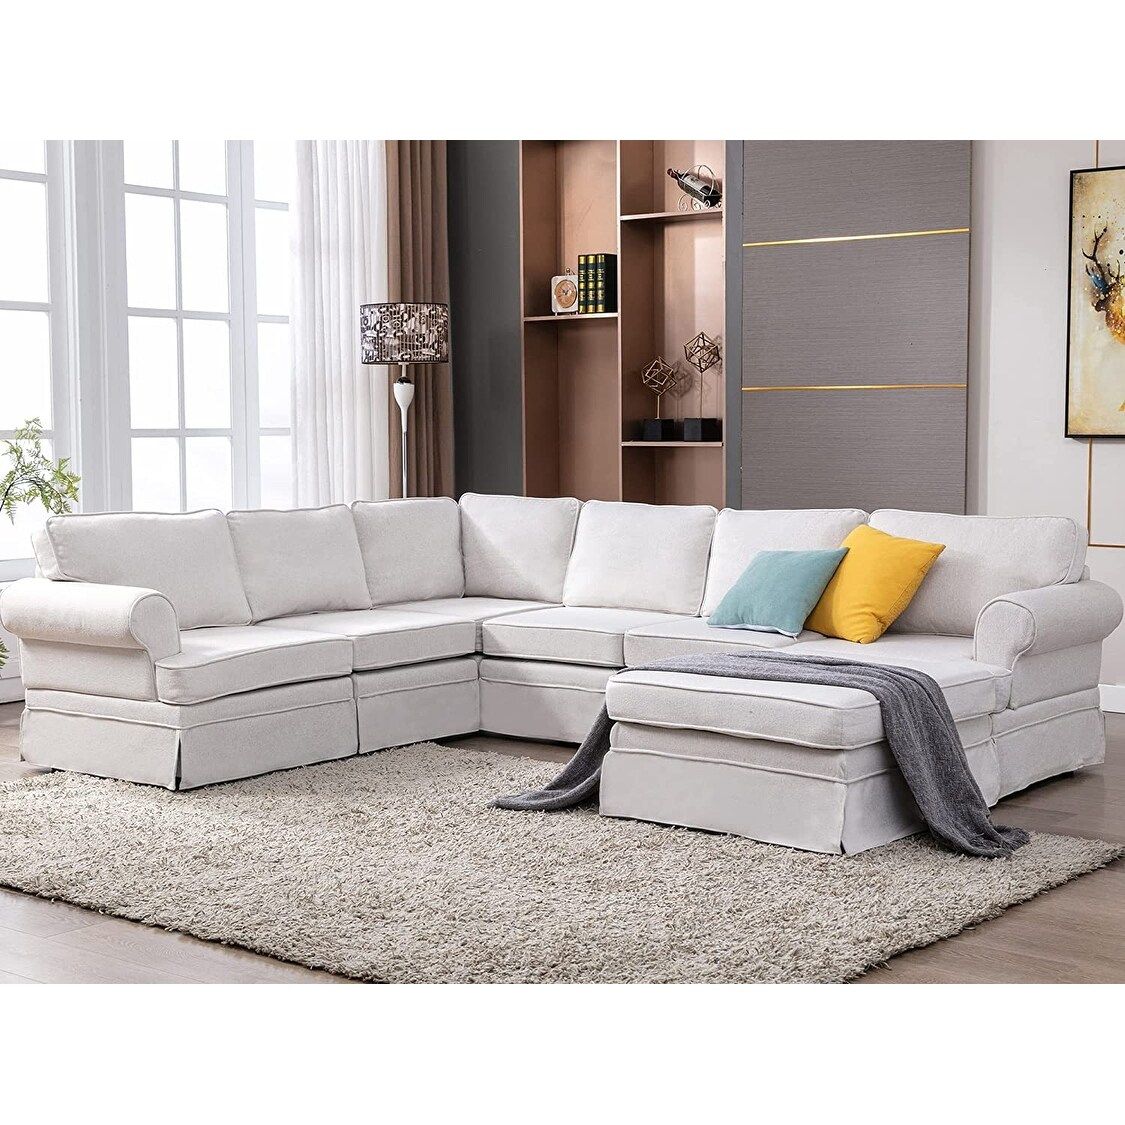 U Shaped Upholstered Modular Sectional Sofa With Removable Ottoman, Light  Beige – – 37864833 In Upholstered Modular Couches With Storage (View 14 of 15)